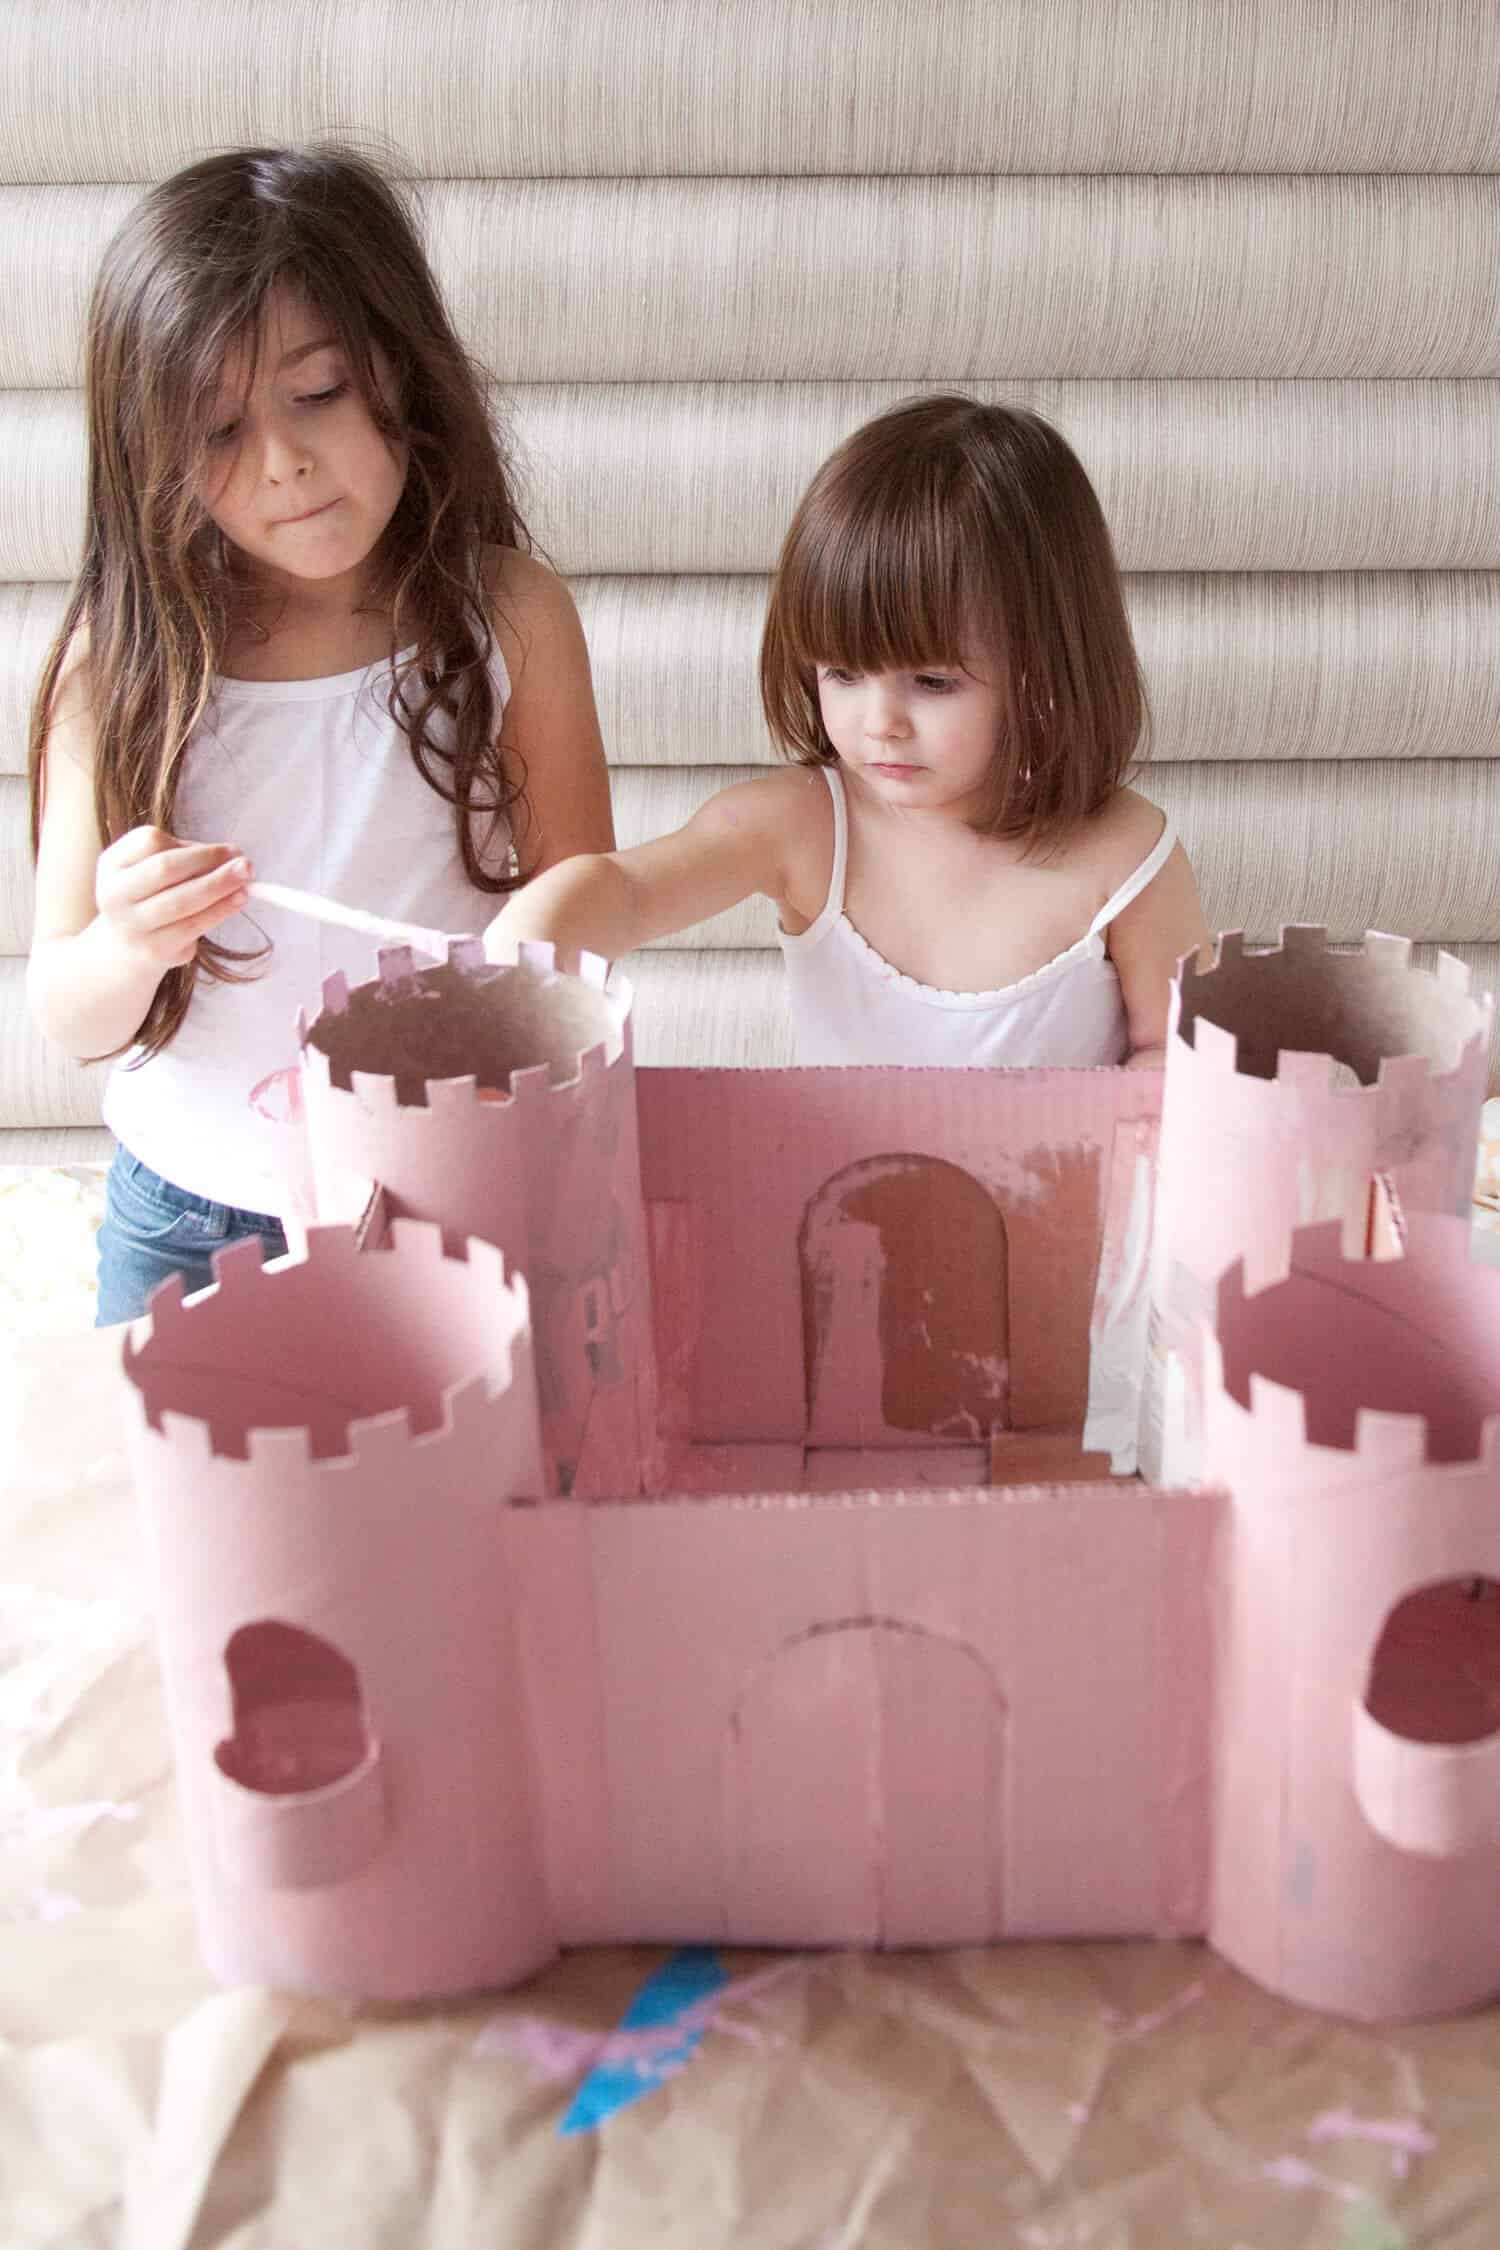 upcycled cardboard castle